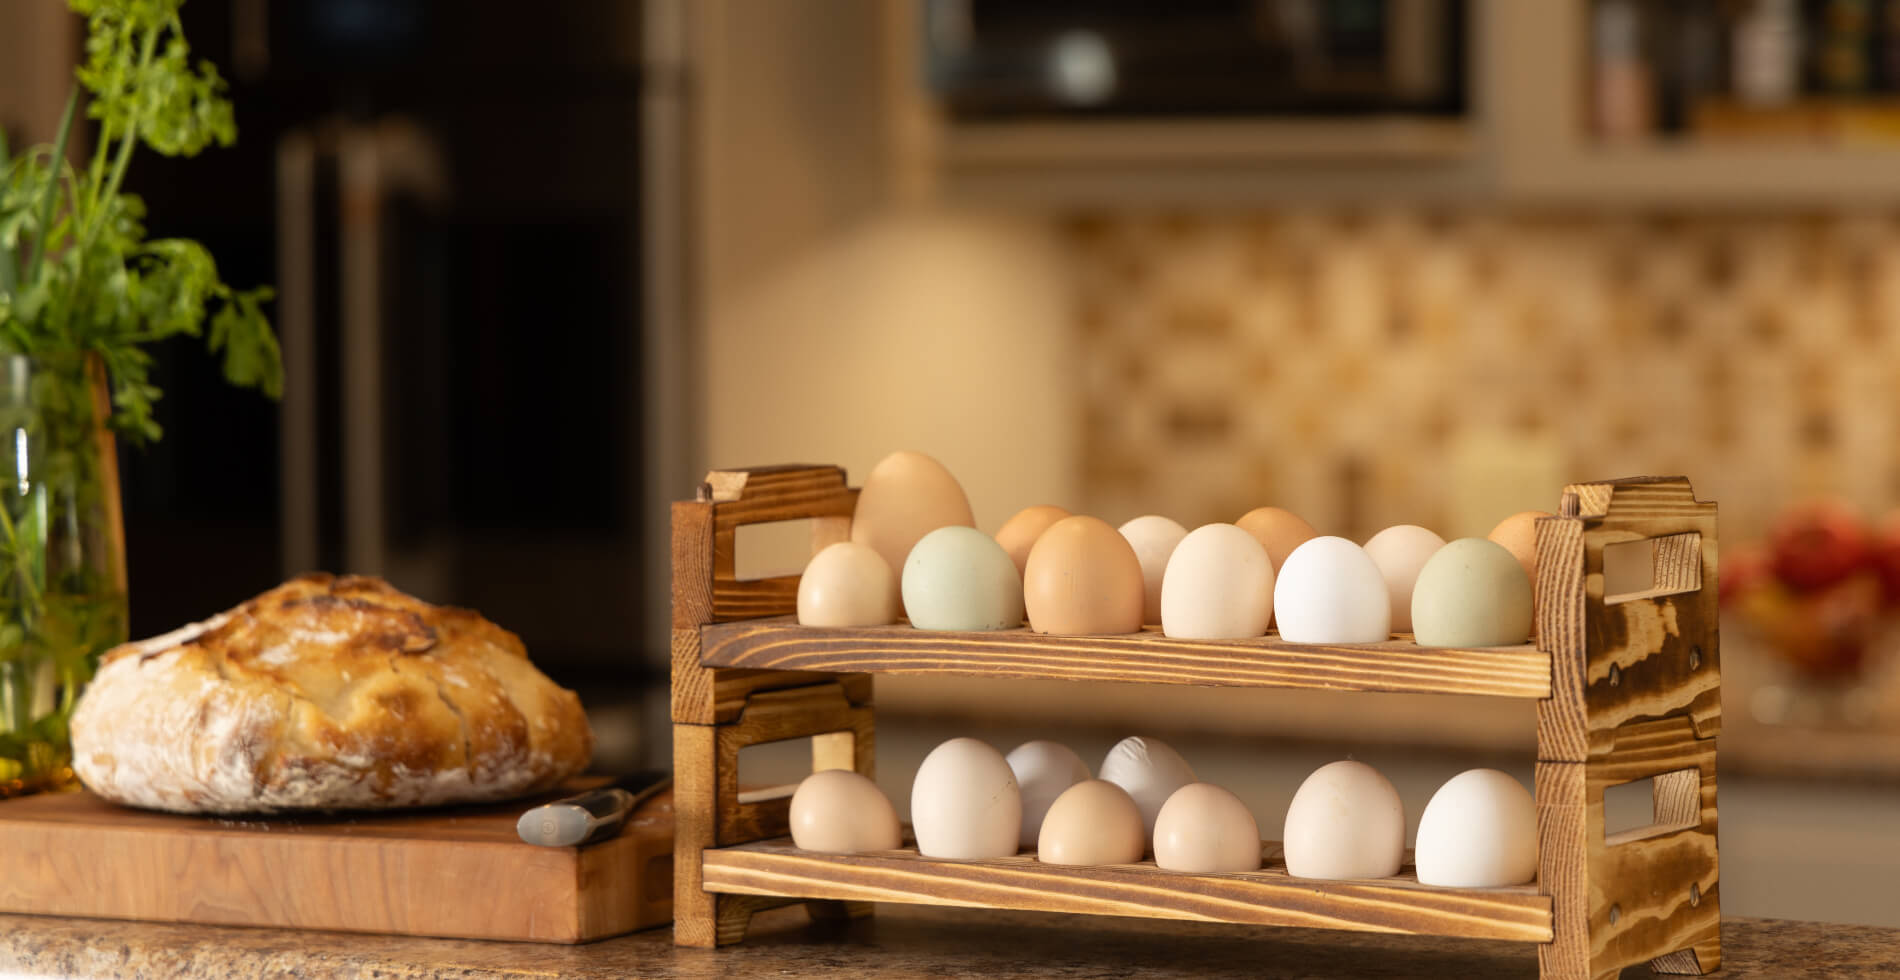 A counter with a wood block and a loaf of freshly baked bread on it, and a double wooden egg rack filled with fresh farm eggs in various colors.